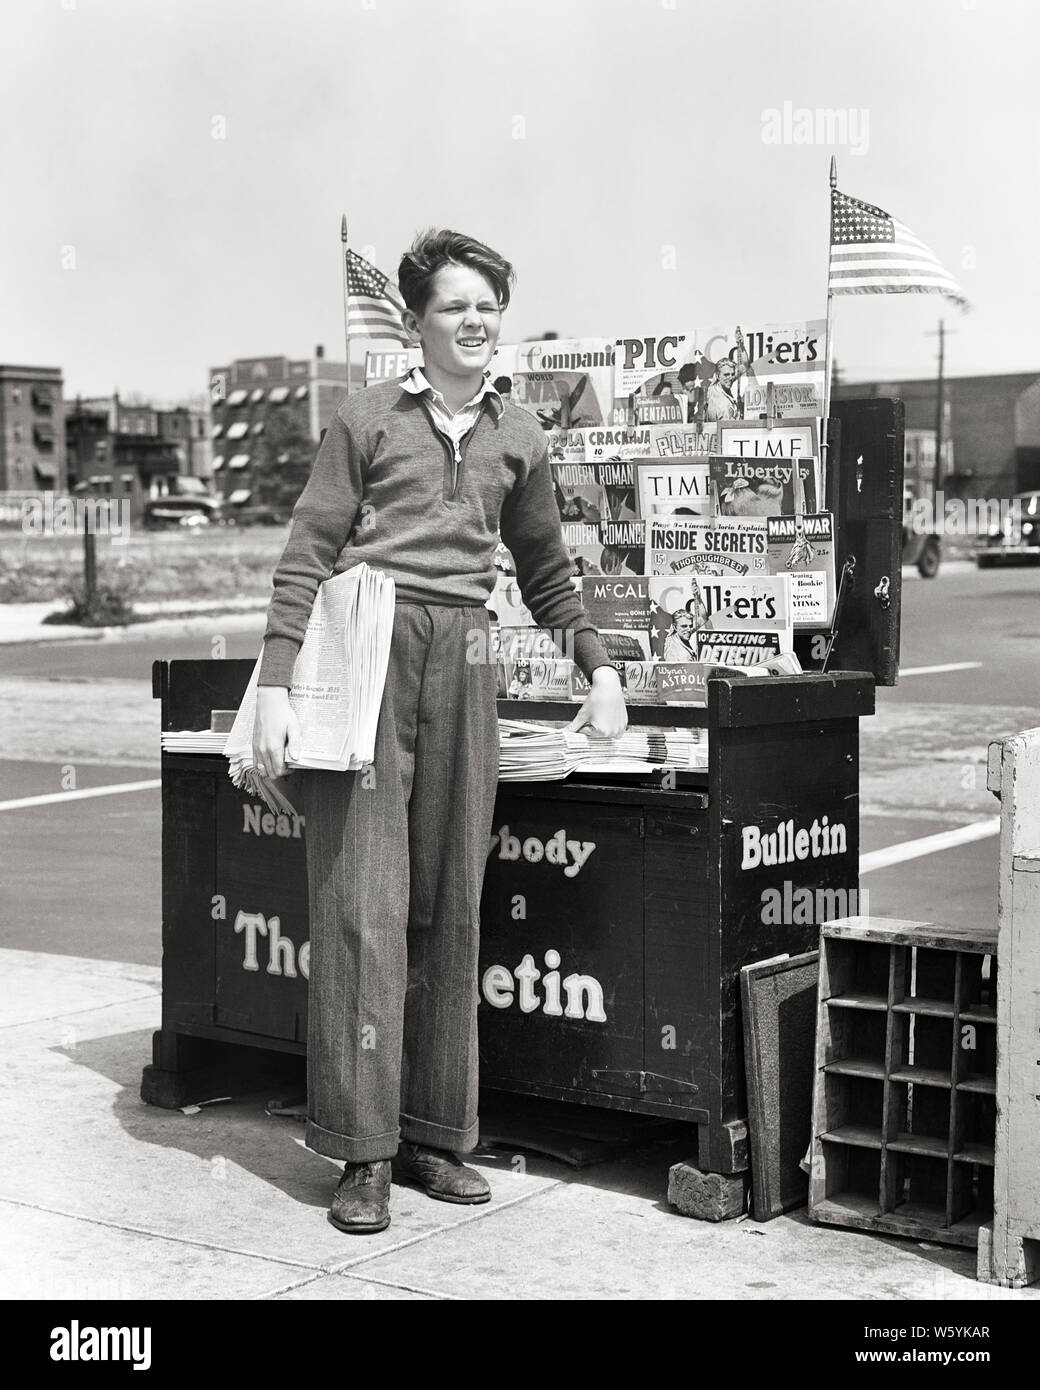 1940s ENTERPRISING BOY STANDING BY NEWSPAPER AND MAGAZINE CORNER NEWSSTAND SELLING DAILY EVENING PAPERS PHILADELPHIA PA USA - b11520 HAR001 HARS FLAGS INFORMATION LIFESTYLE JOBS COPY SPACE FULL-LENGTH PERSONS MALES CORNER B&W GOALS SKILL OCCUPATION SELLING SKILLS AND LEADERSHIP PA NEWSSTAND PRIDE BY OPPORTUNITY OCCUPATIONS CONCEPTUAL HAWKING TEENAGED PART-TIME ENTERPRISING JUVENILES PRE-TEEN RED WHITE AND BLUE STARS AND STRIPS AFTERNOON BLACK AND WHITE CAUCASIAN ETHNICITY DAILY HAR001 OLD FASHIONED Stock Photo